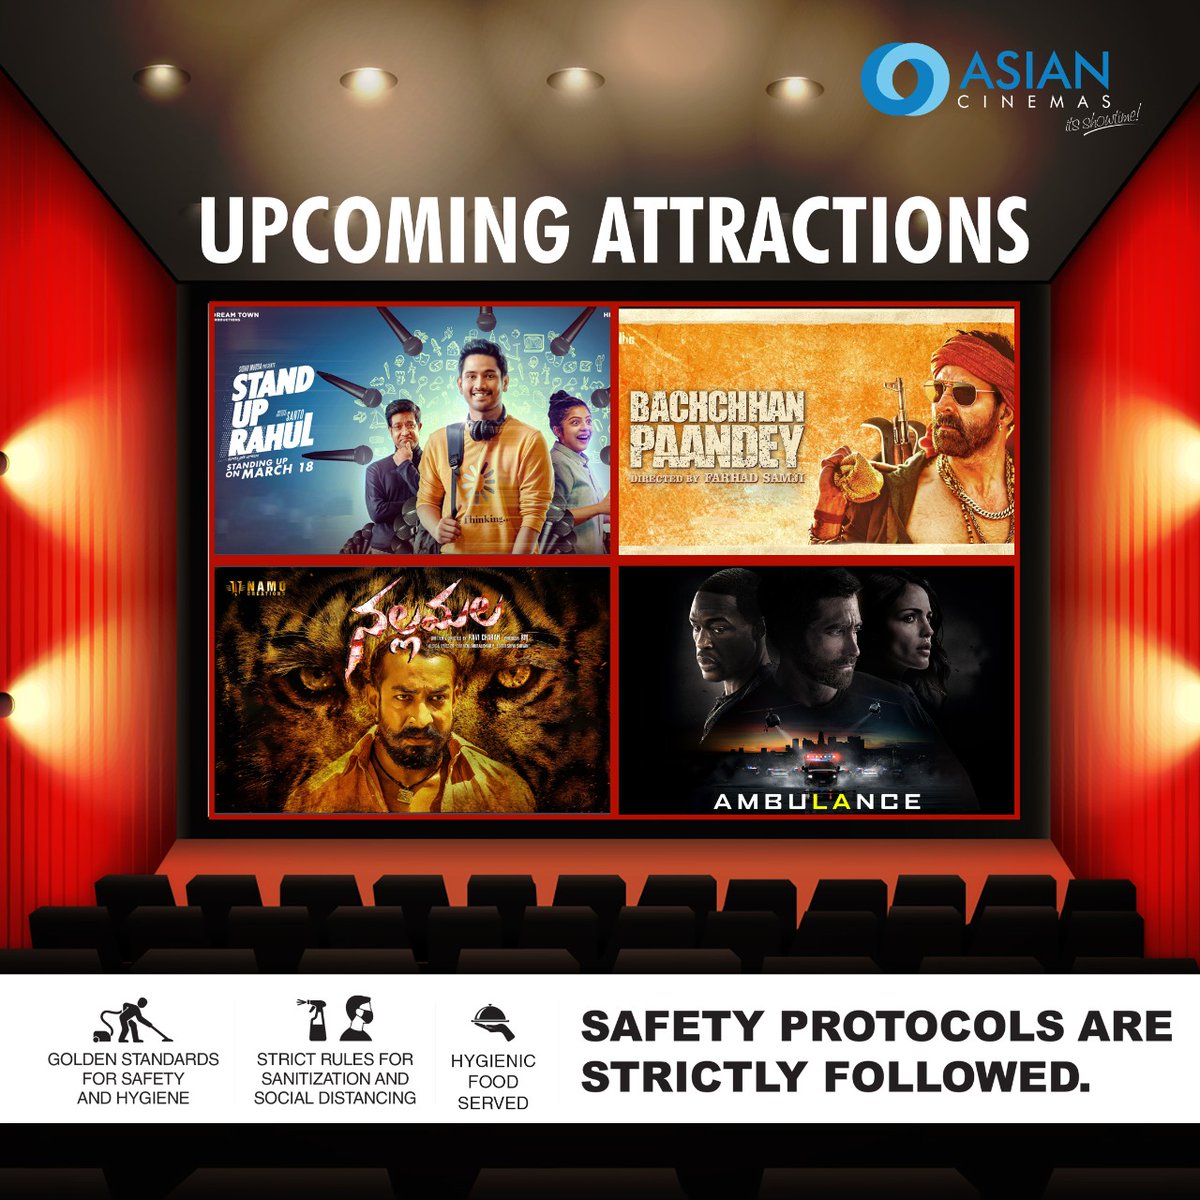 #UpcomingAttractions #StandUpRahul #BachchhanPaandey #Nallamalla And #AmbulanceMovie ..Book Your Tickets And Watch it in Asian Cinemas From March 18th! #AsianCinemas